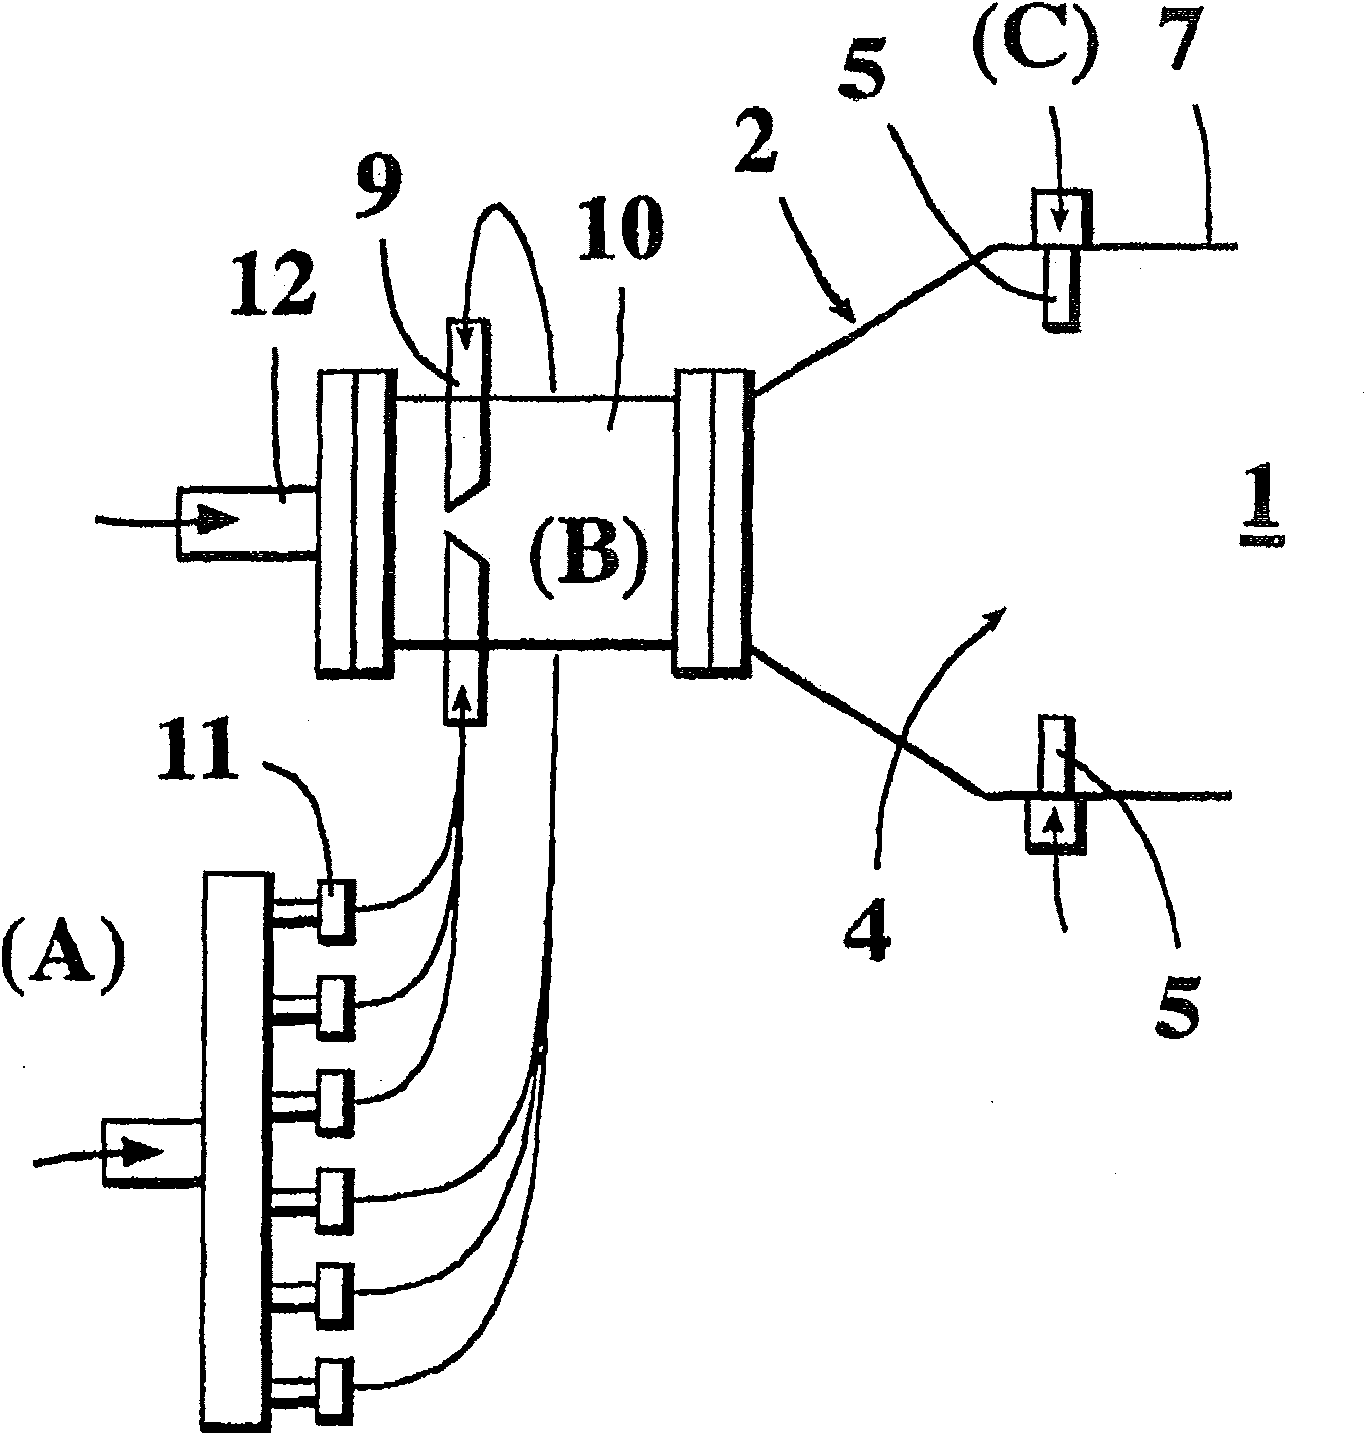 Method and apparatus for generating gas pulses